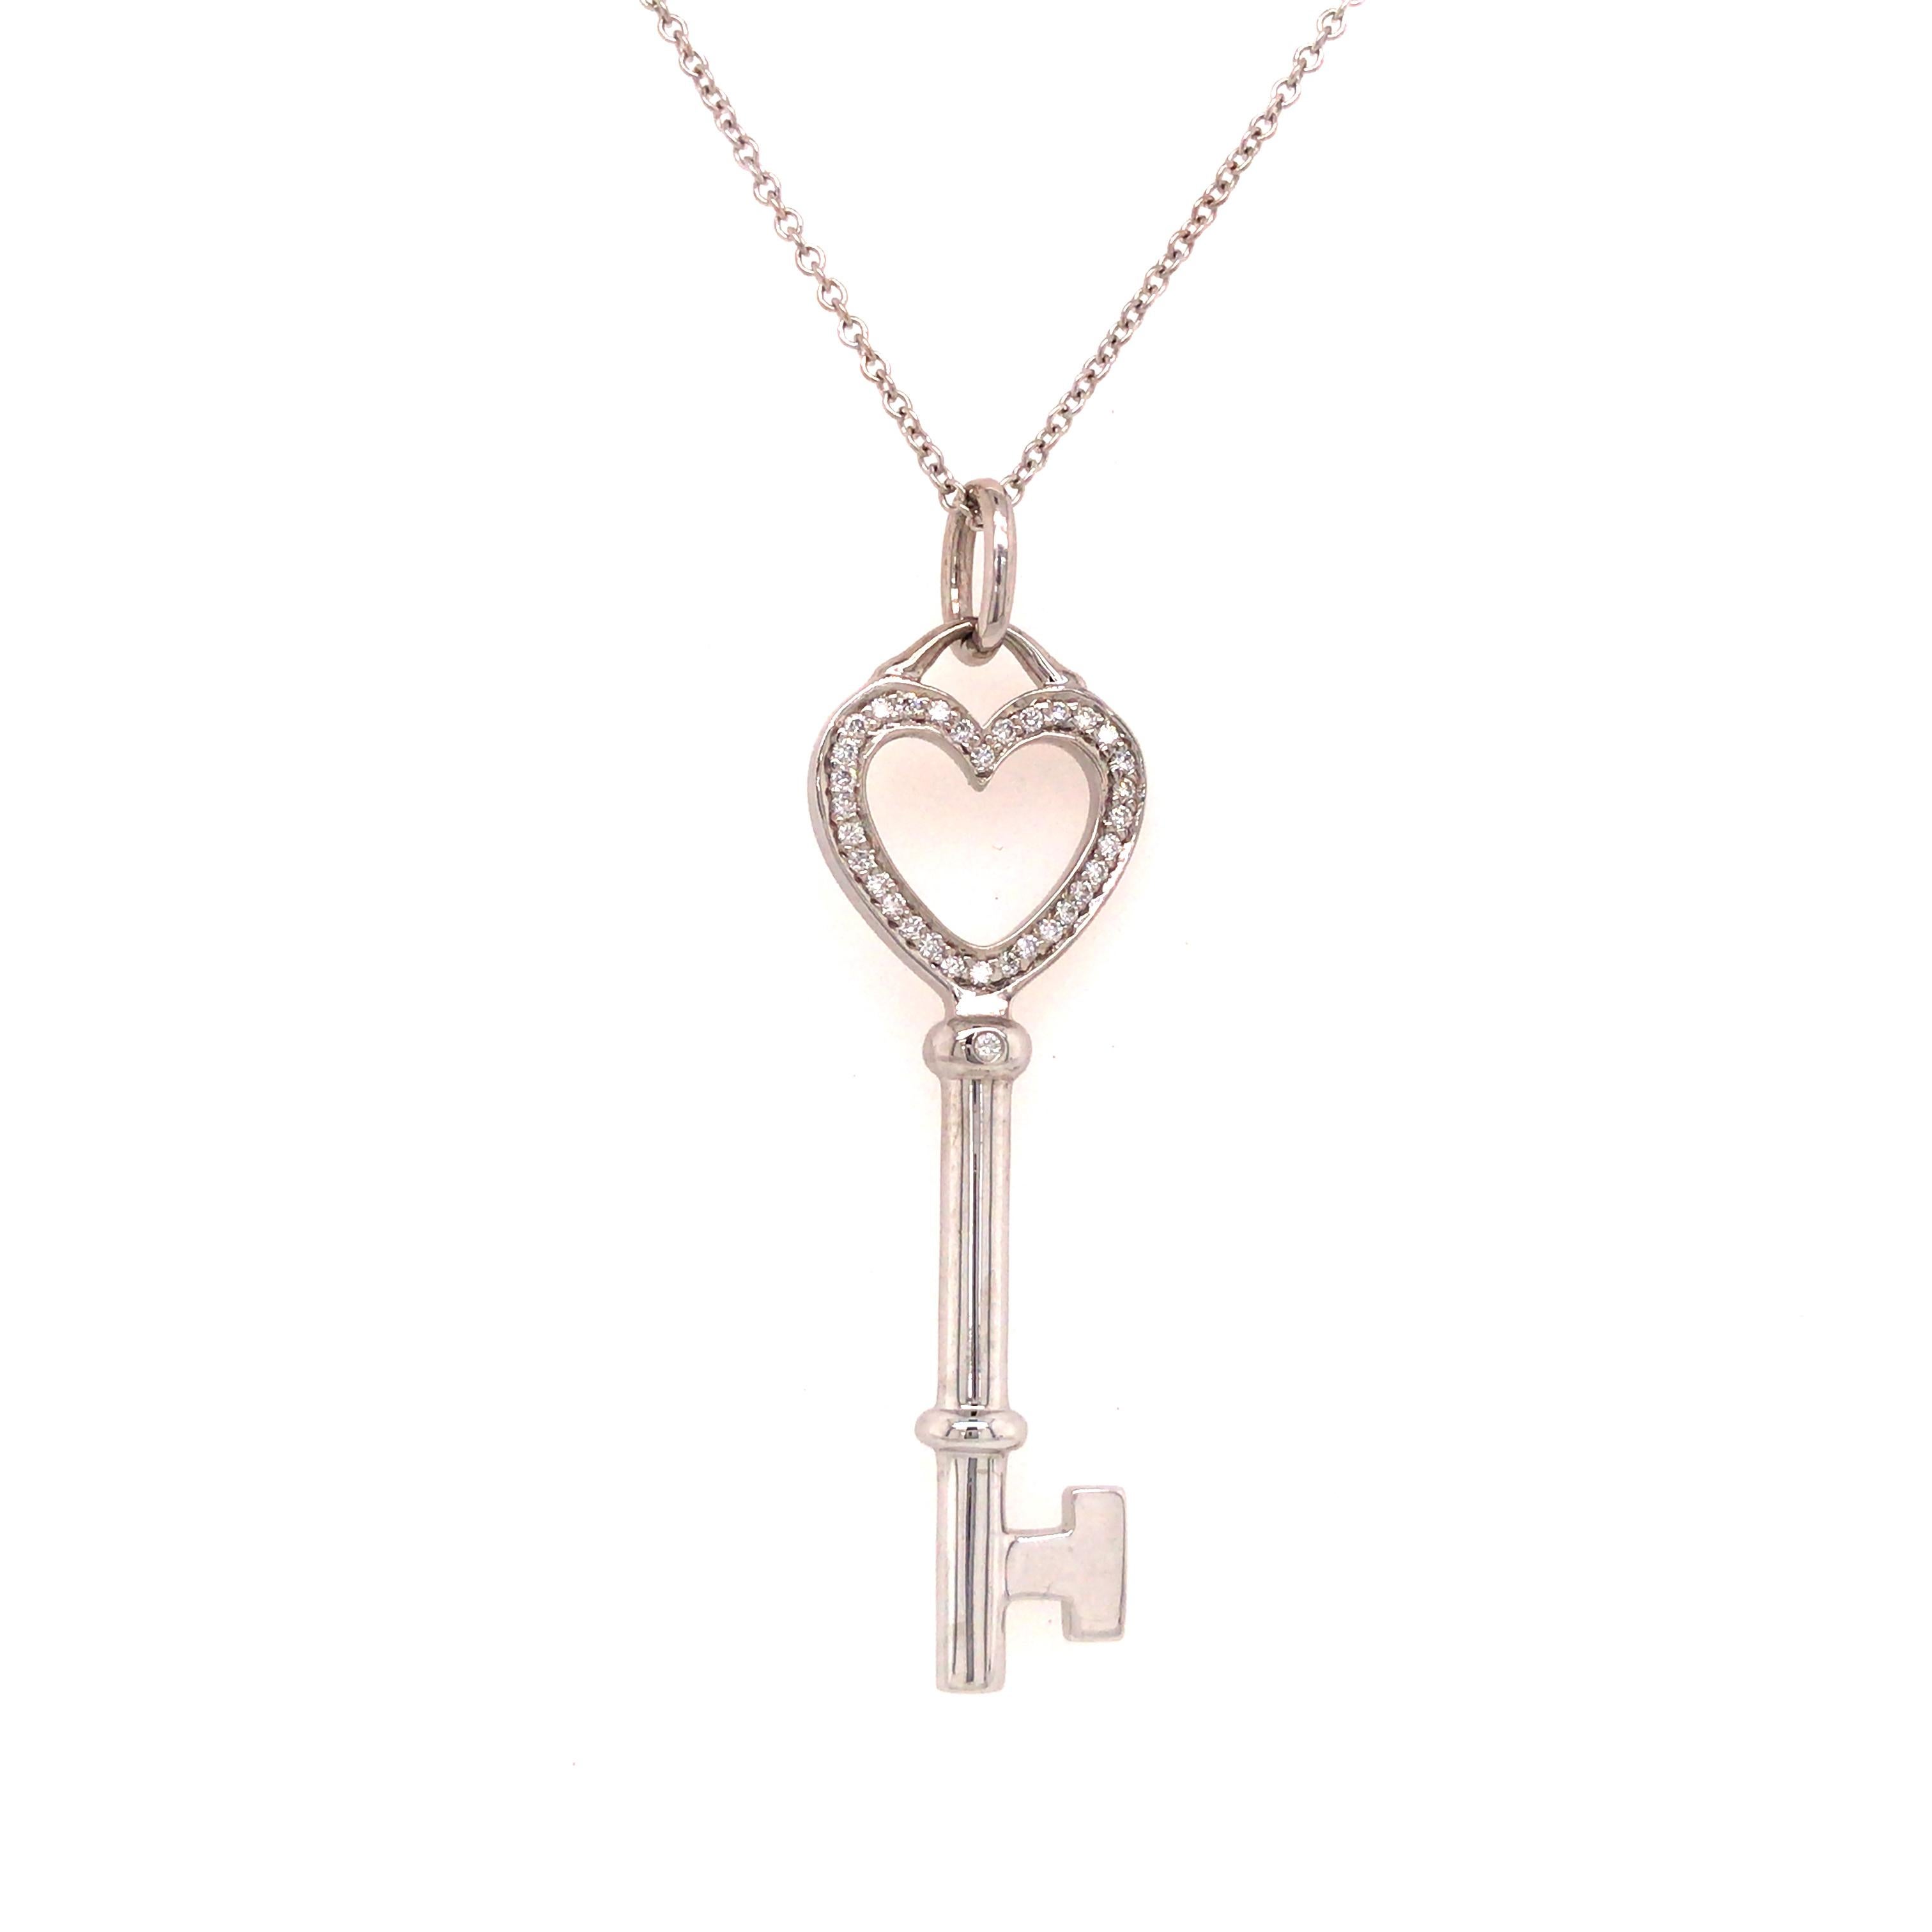 Tiffany & Co. Diamond Heart Key Pendant in 18K White Gold.  Round Brilliant Cut Diamonds weighing 0.08 carat total weight, F-G in color and VS in clarity are expertly set in the heart shape top.  The Pendant measures 1 5/8 inch in length including